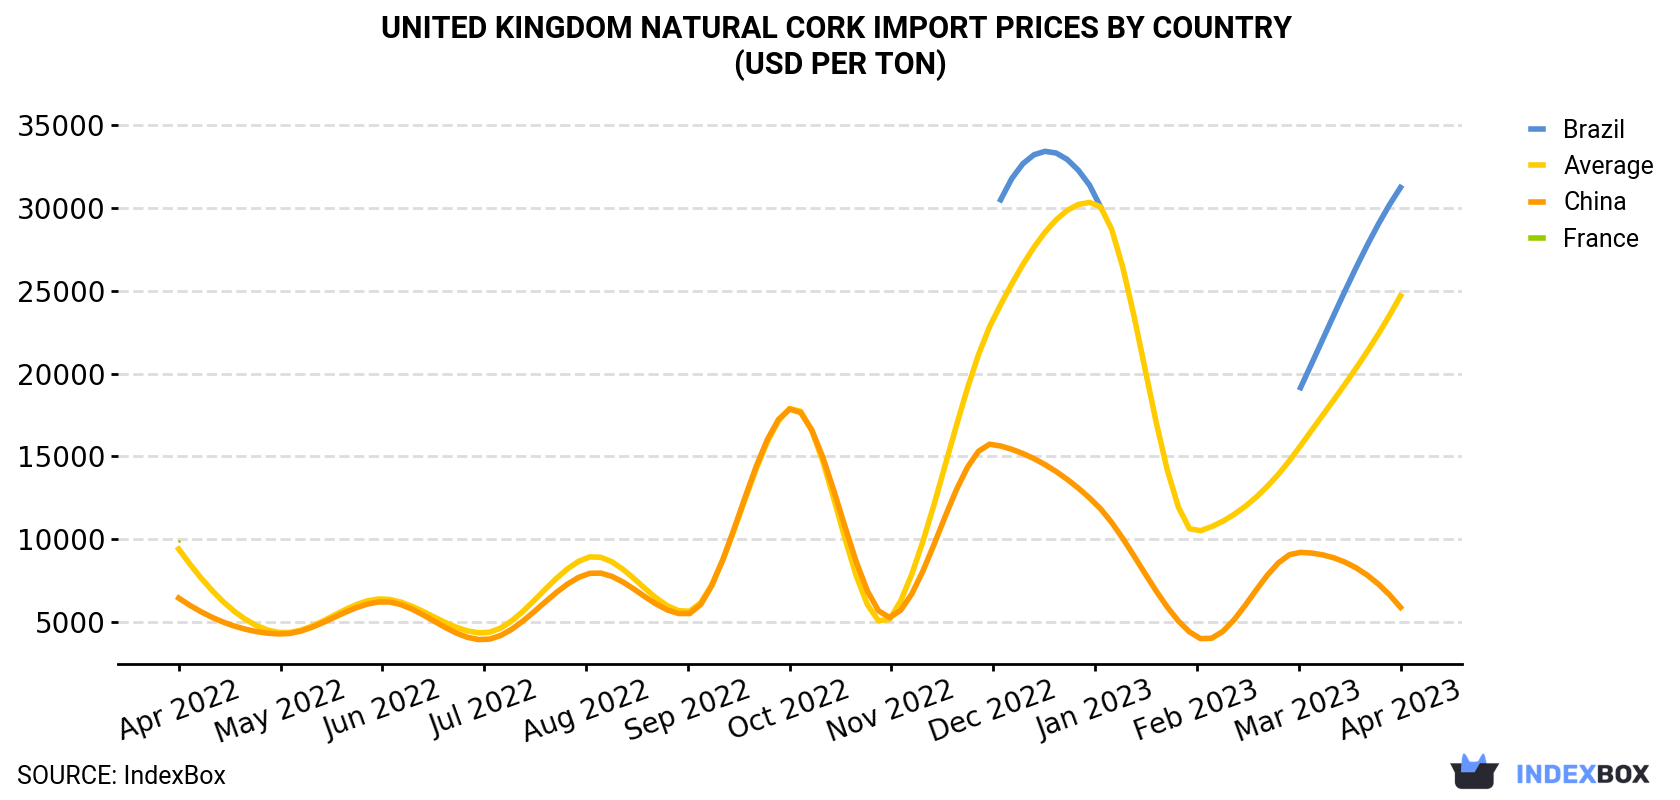 United Kingdom Natural Cork Import Prices By Country (USD Per Ton)